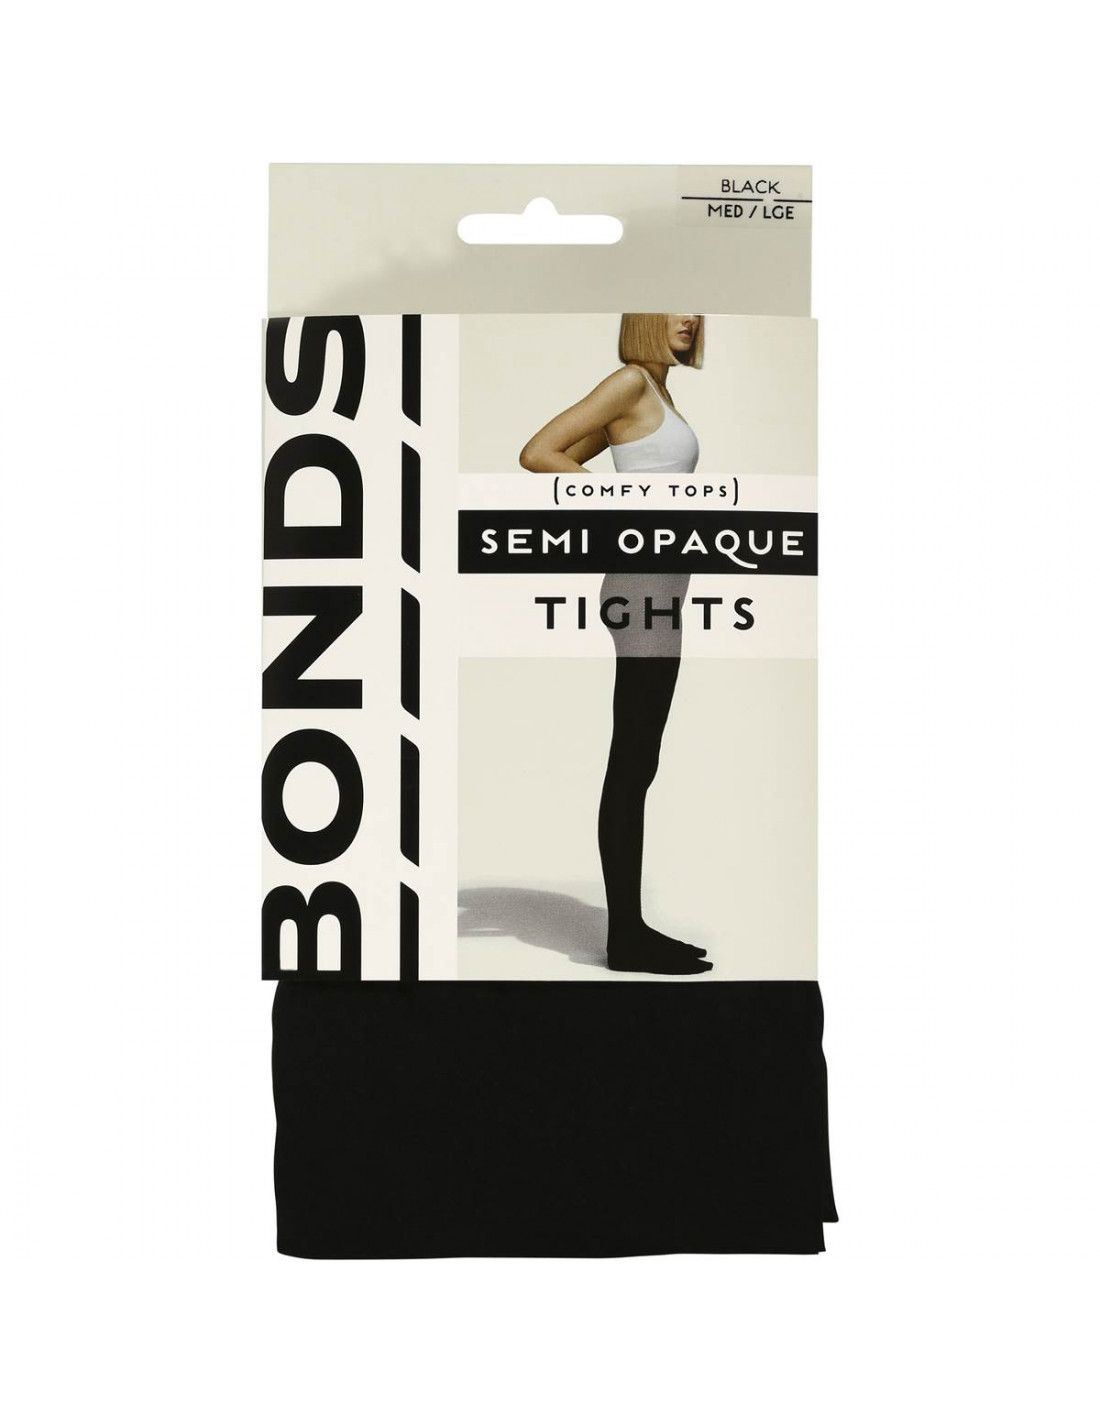 Bonds Comfy Tops Semi Opaque Tights Black Med-lge each | Ally's Bas